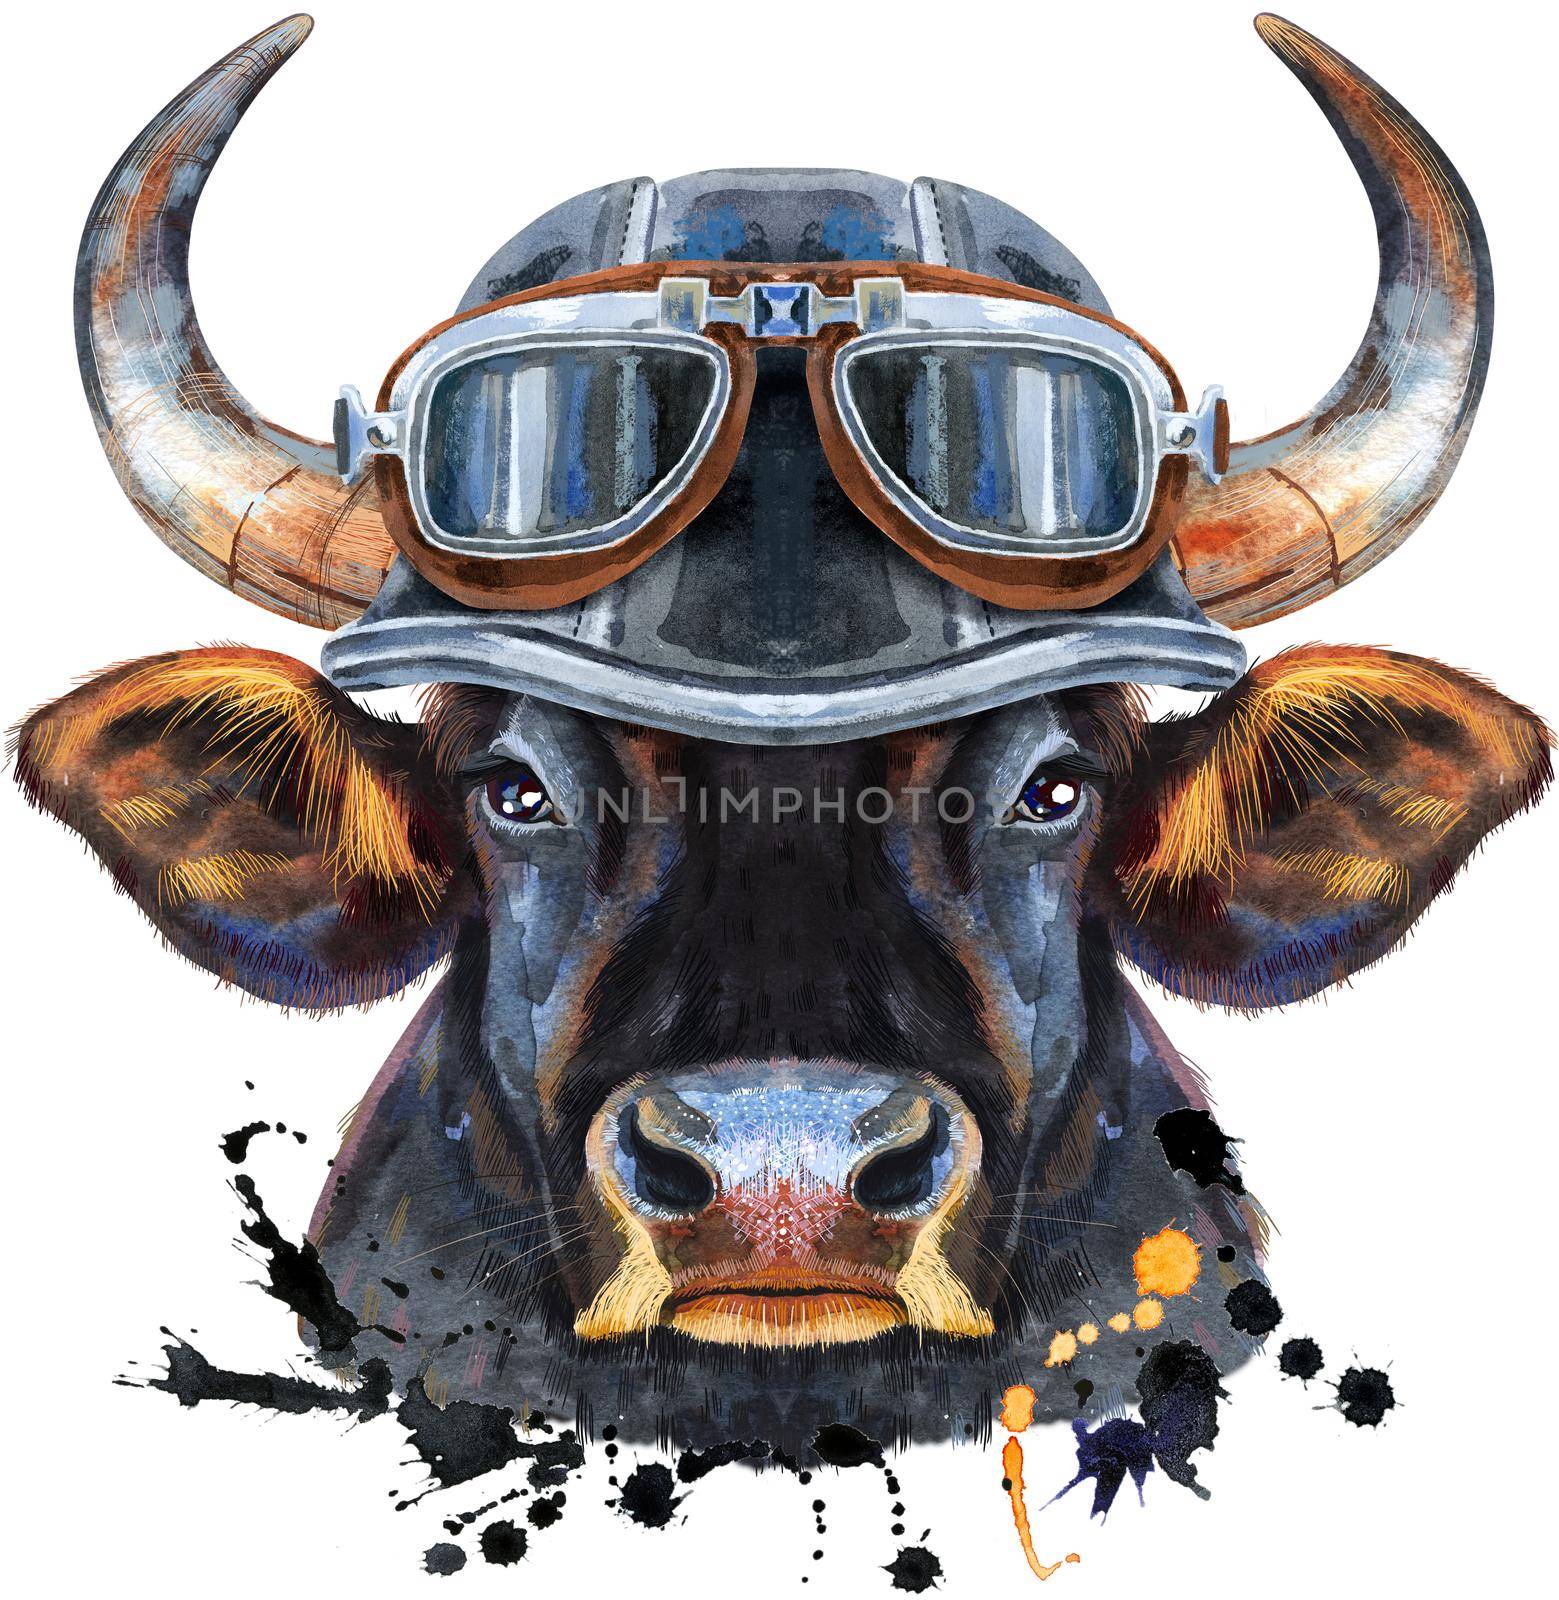 Bull watercolor graphics. Bull in a biker helmet with glasses. Animal illustration with splashes. Watercolor textured background.